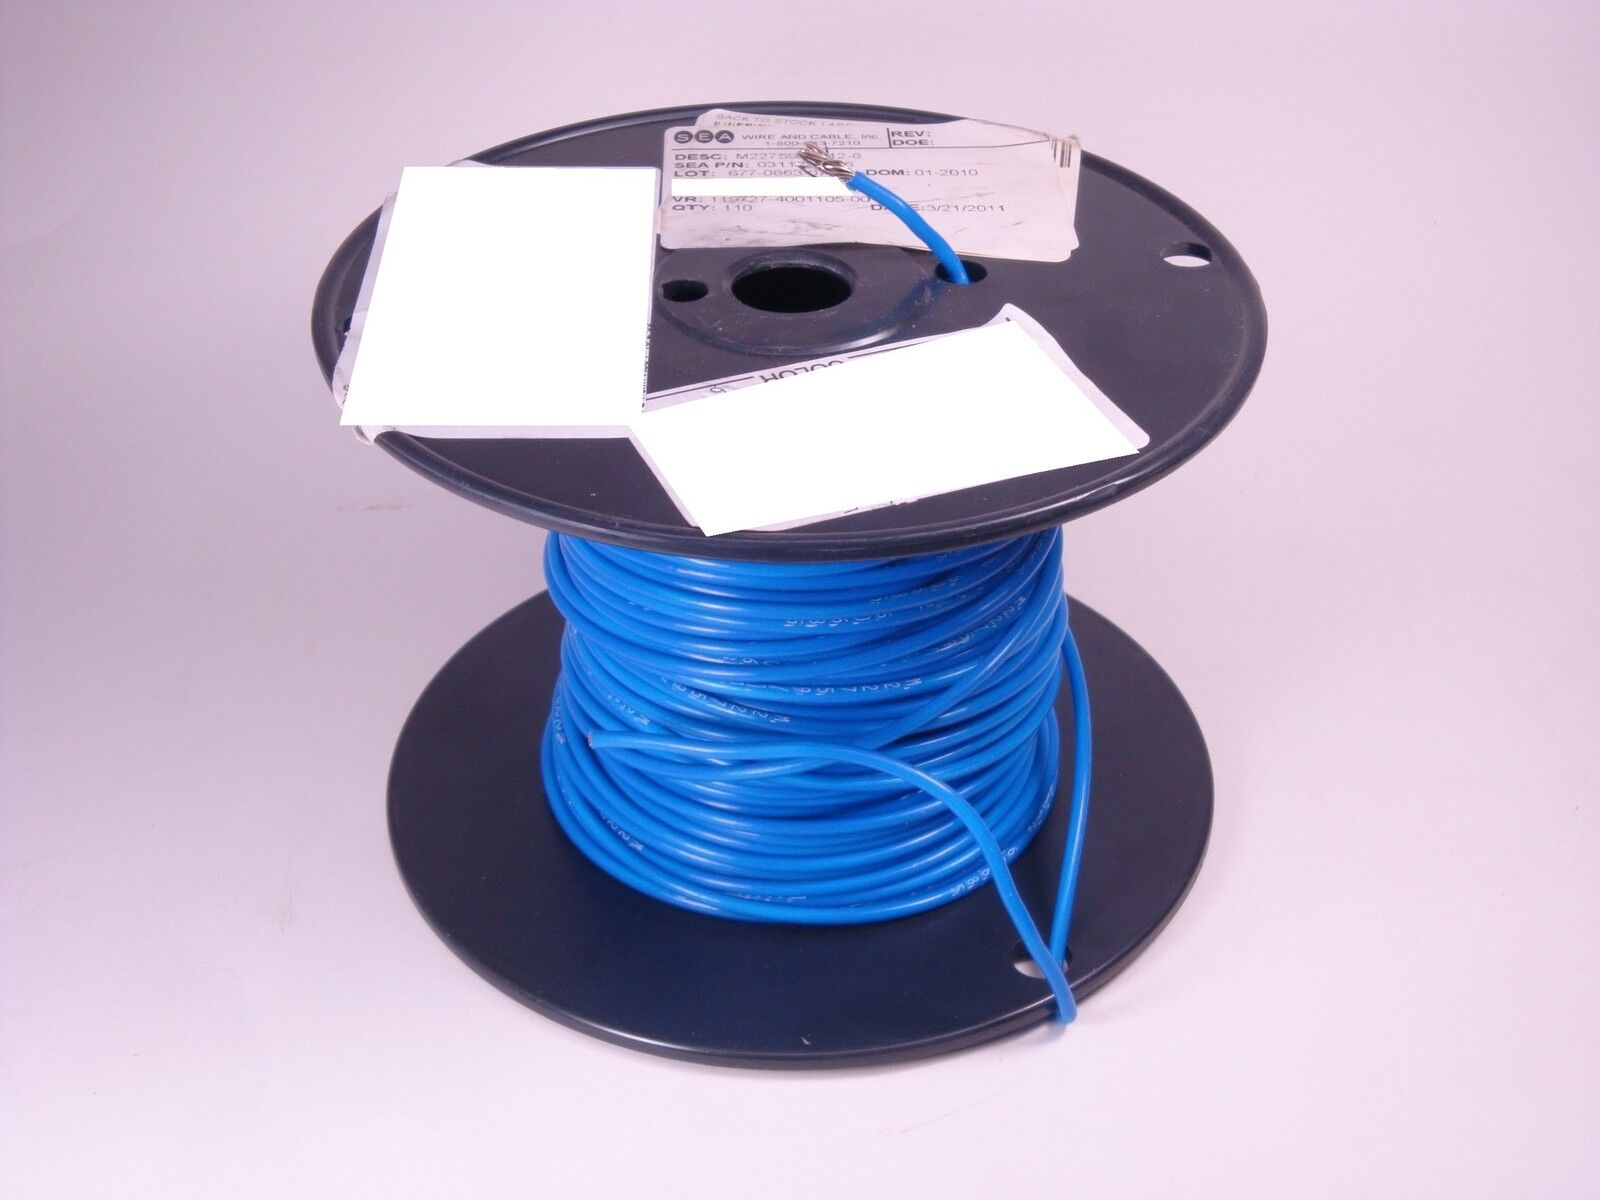 M22759/11-12-6 Specialty Cable PTFE Hookup Wire 12AWG 19X25 Blue 125' Partial Specialy Cable Corp M22759/11-12-6